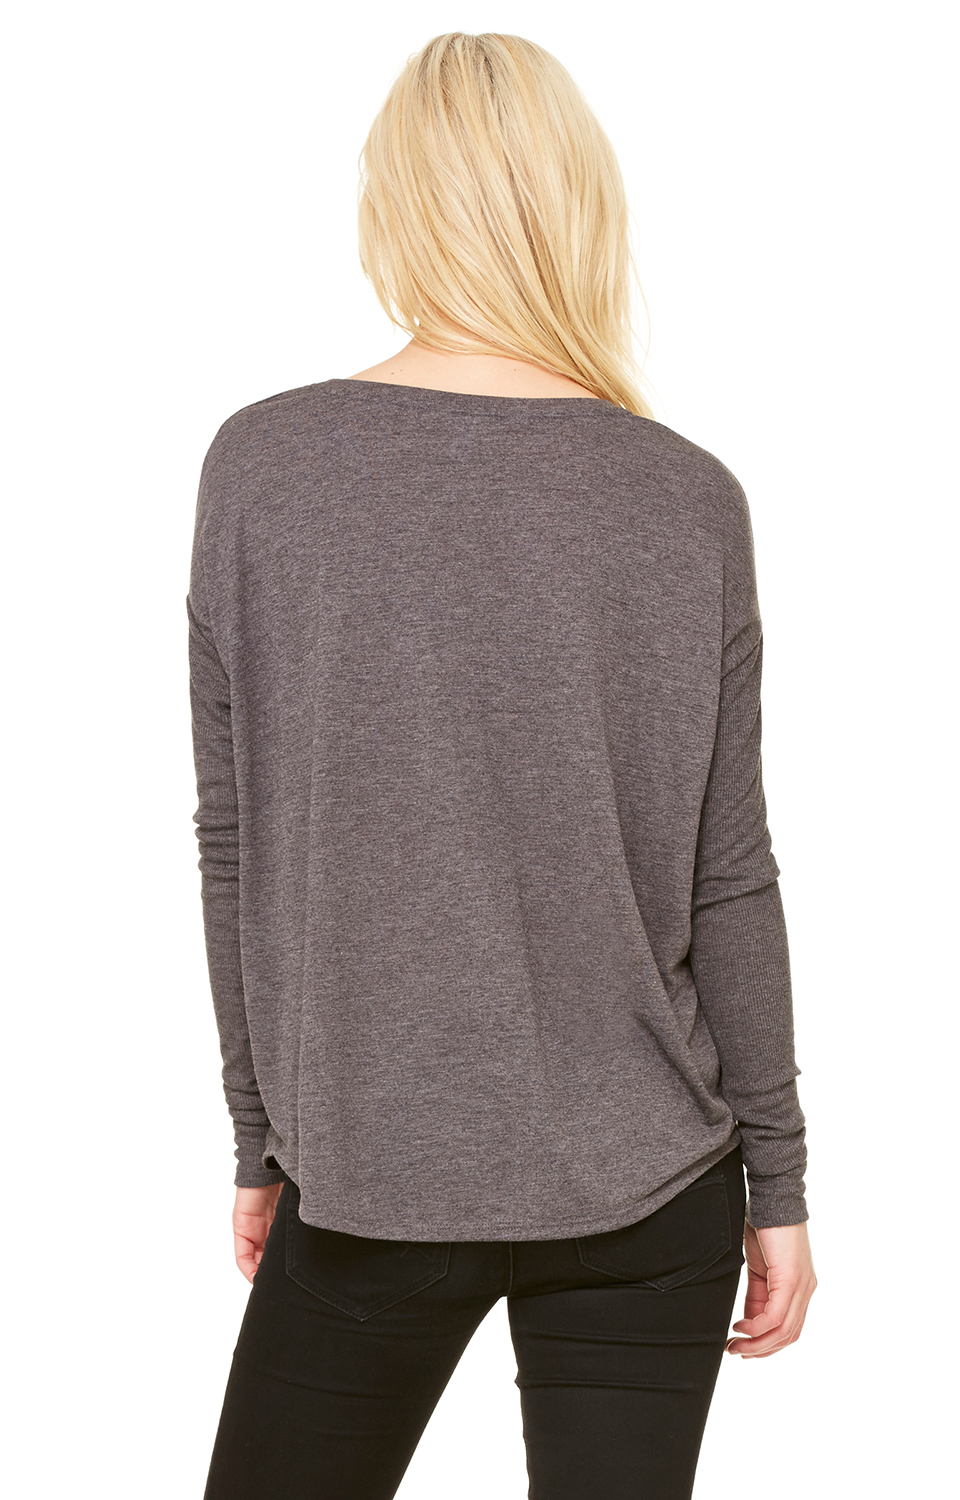 Download Bella + Canvas 8852 Ladies' Flowy Long-Sleeve T-Shirt with 2x1 Sleeves - JiffyShirts.com